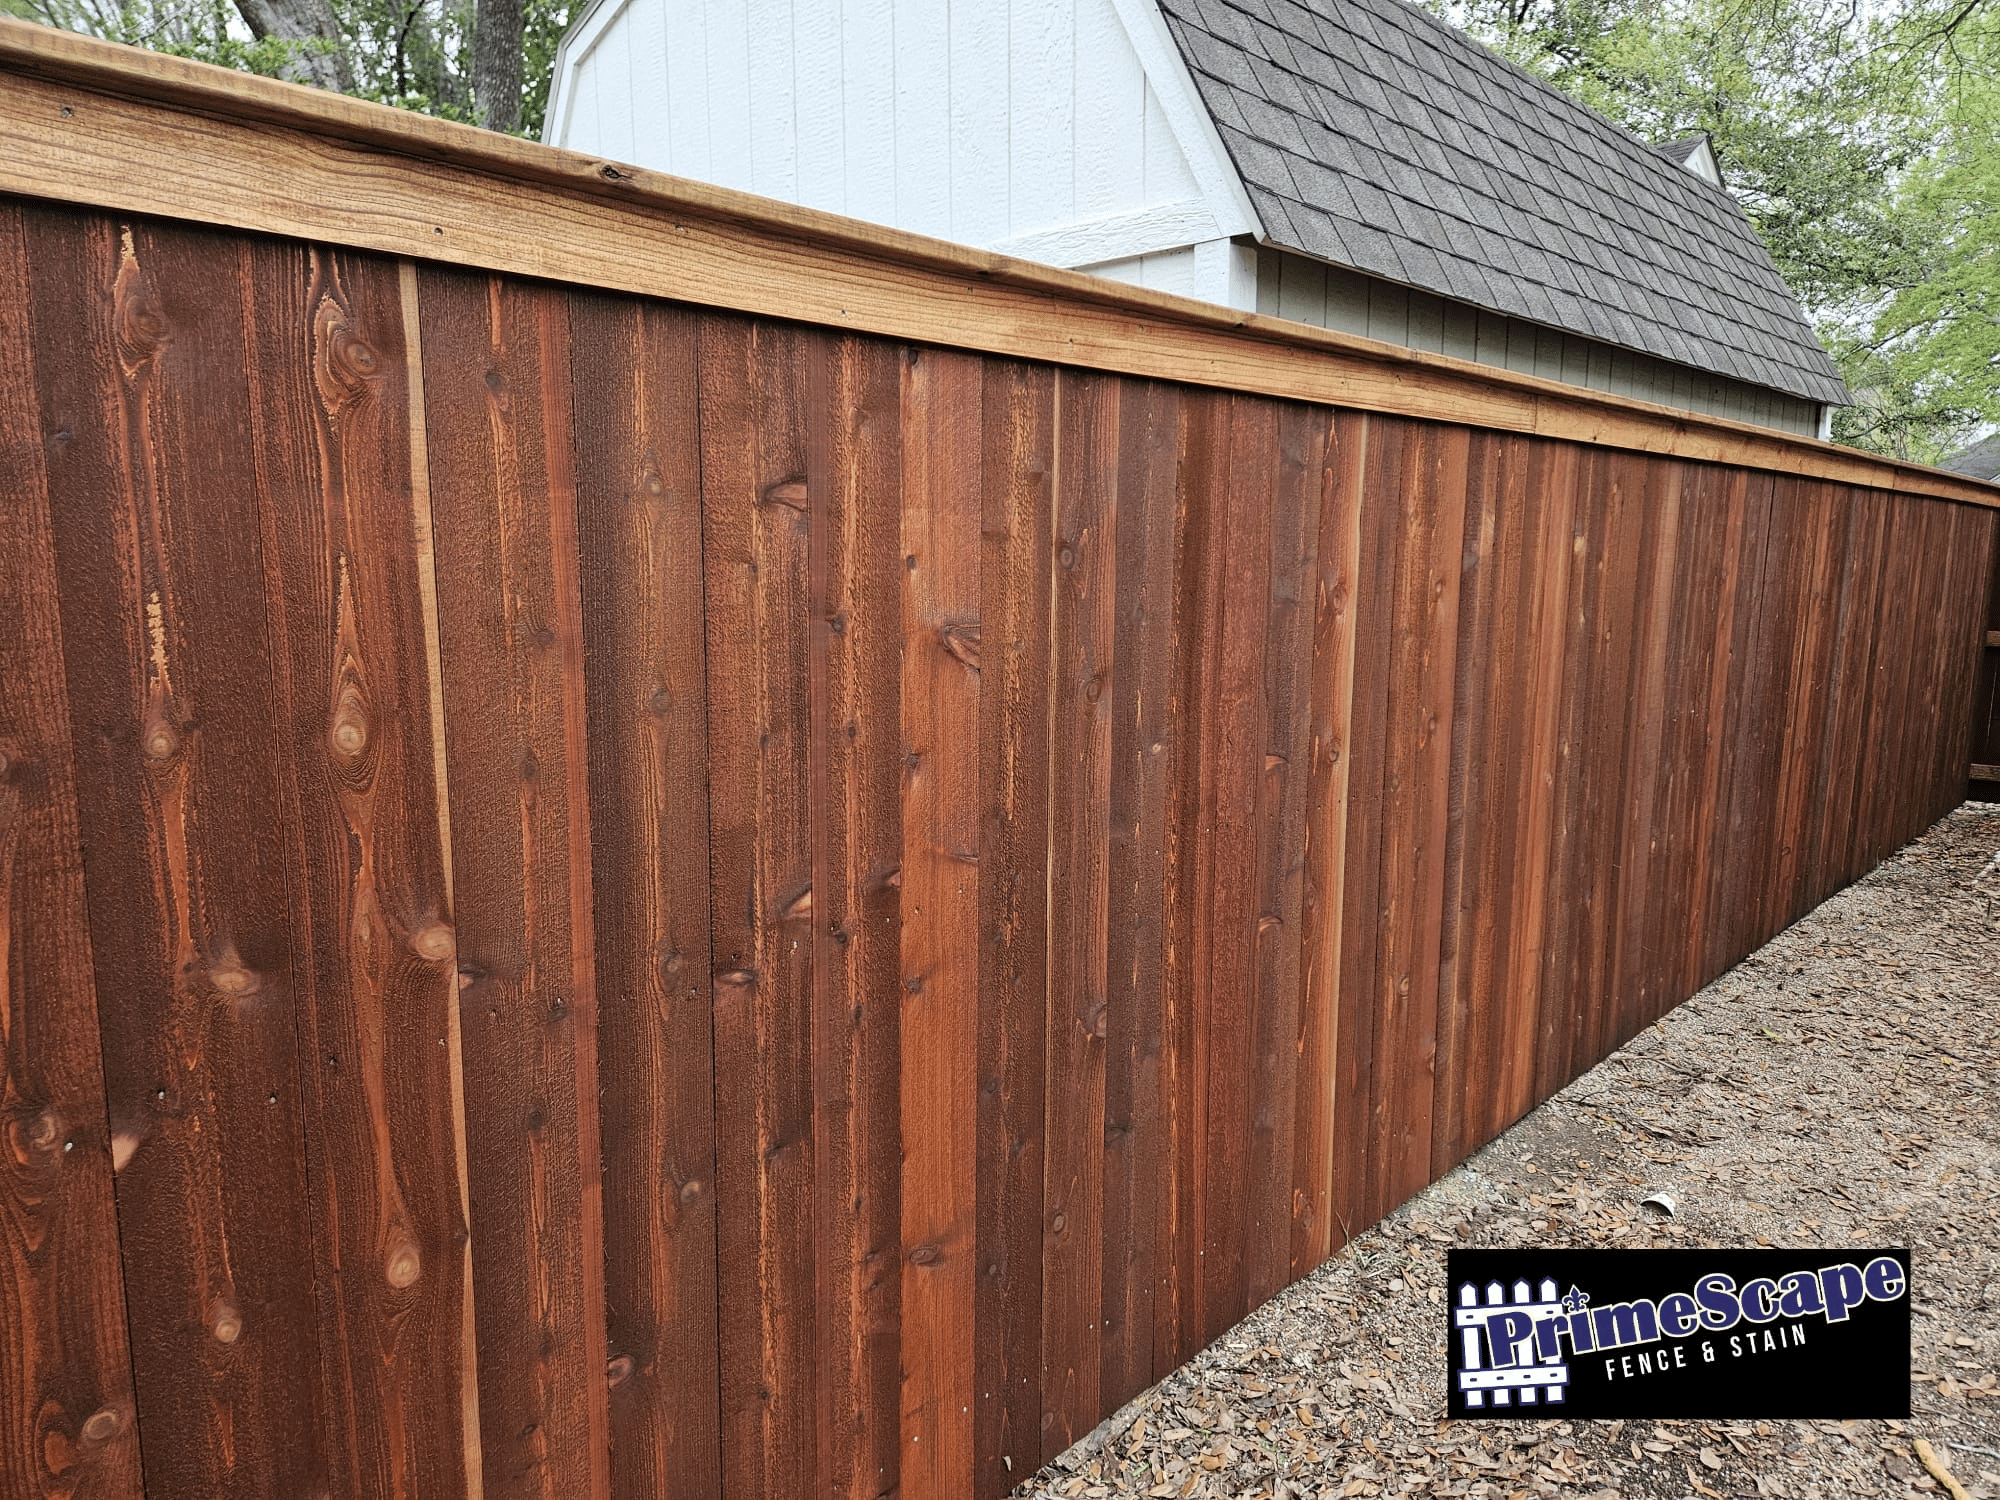 Primescape Fence and Stain: Redefining Excellence in Louisiana’s Fencing Industry